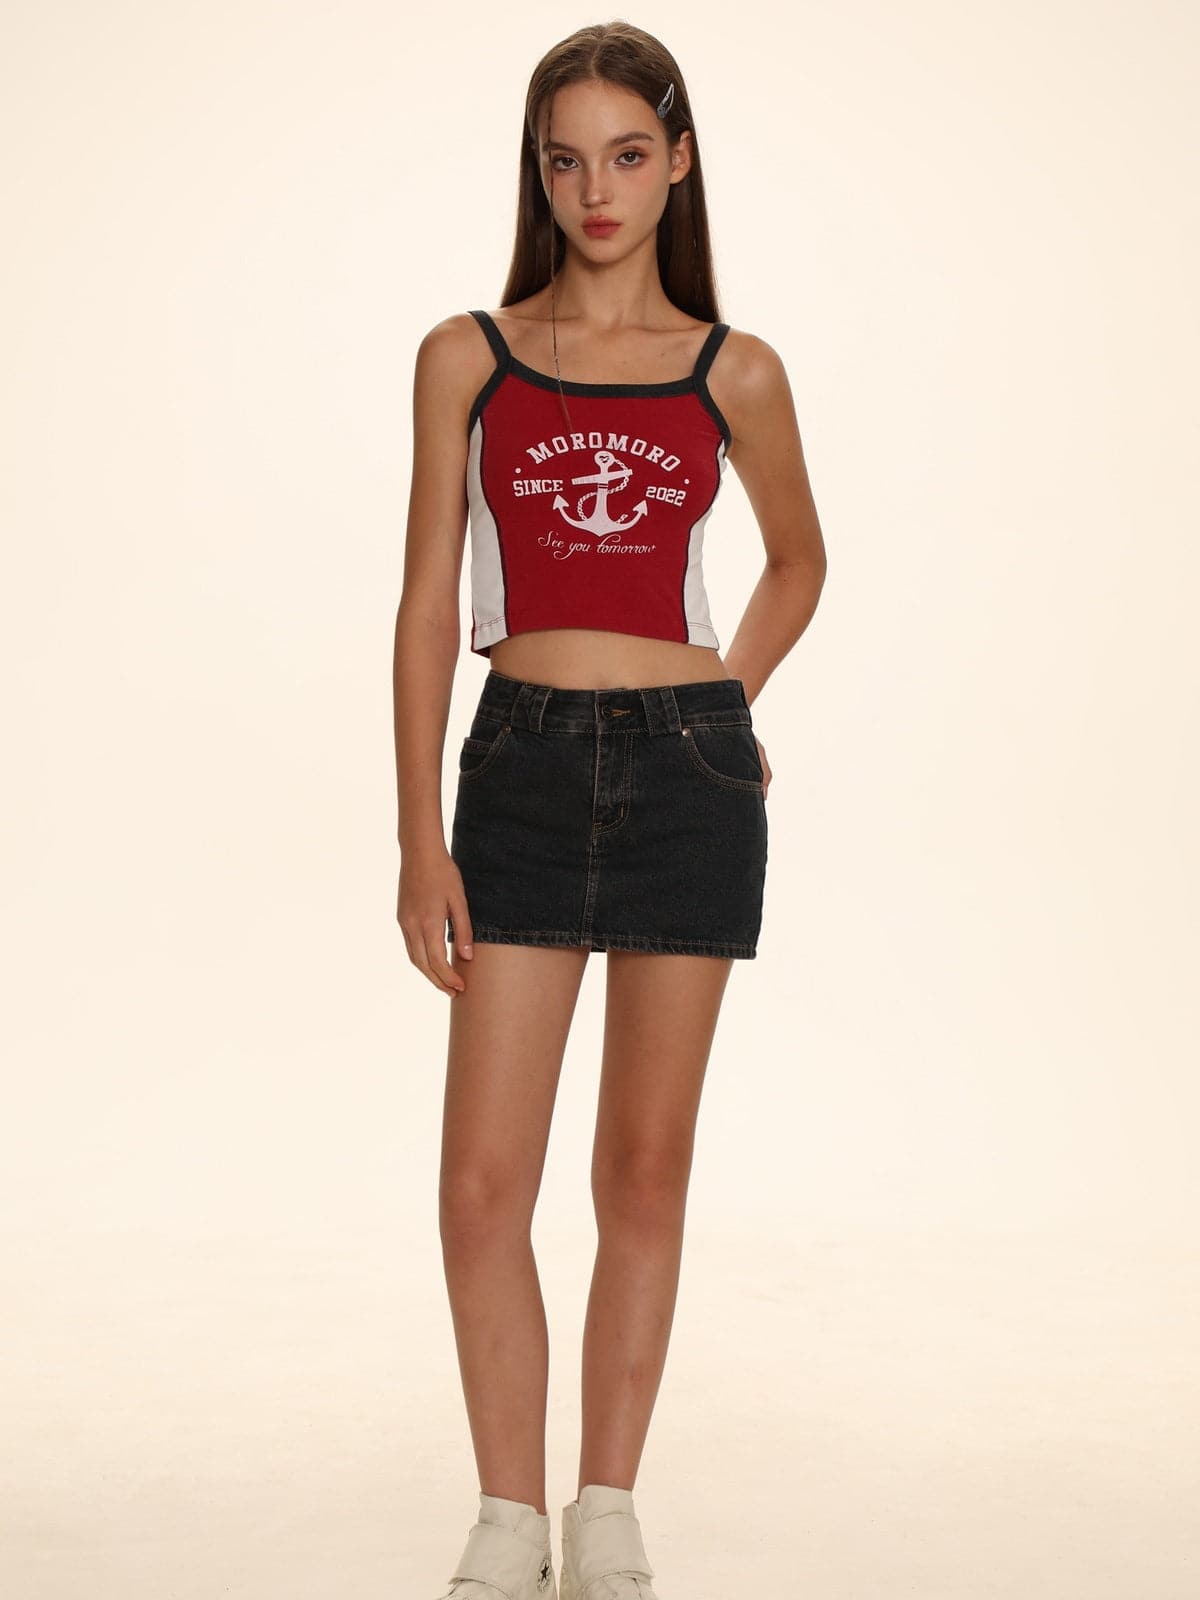 Chic Cropped Contrast Camisole - chiclara